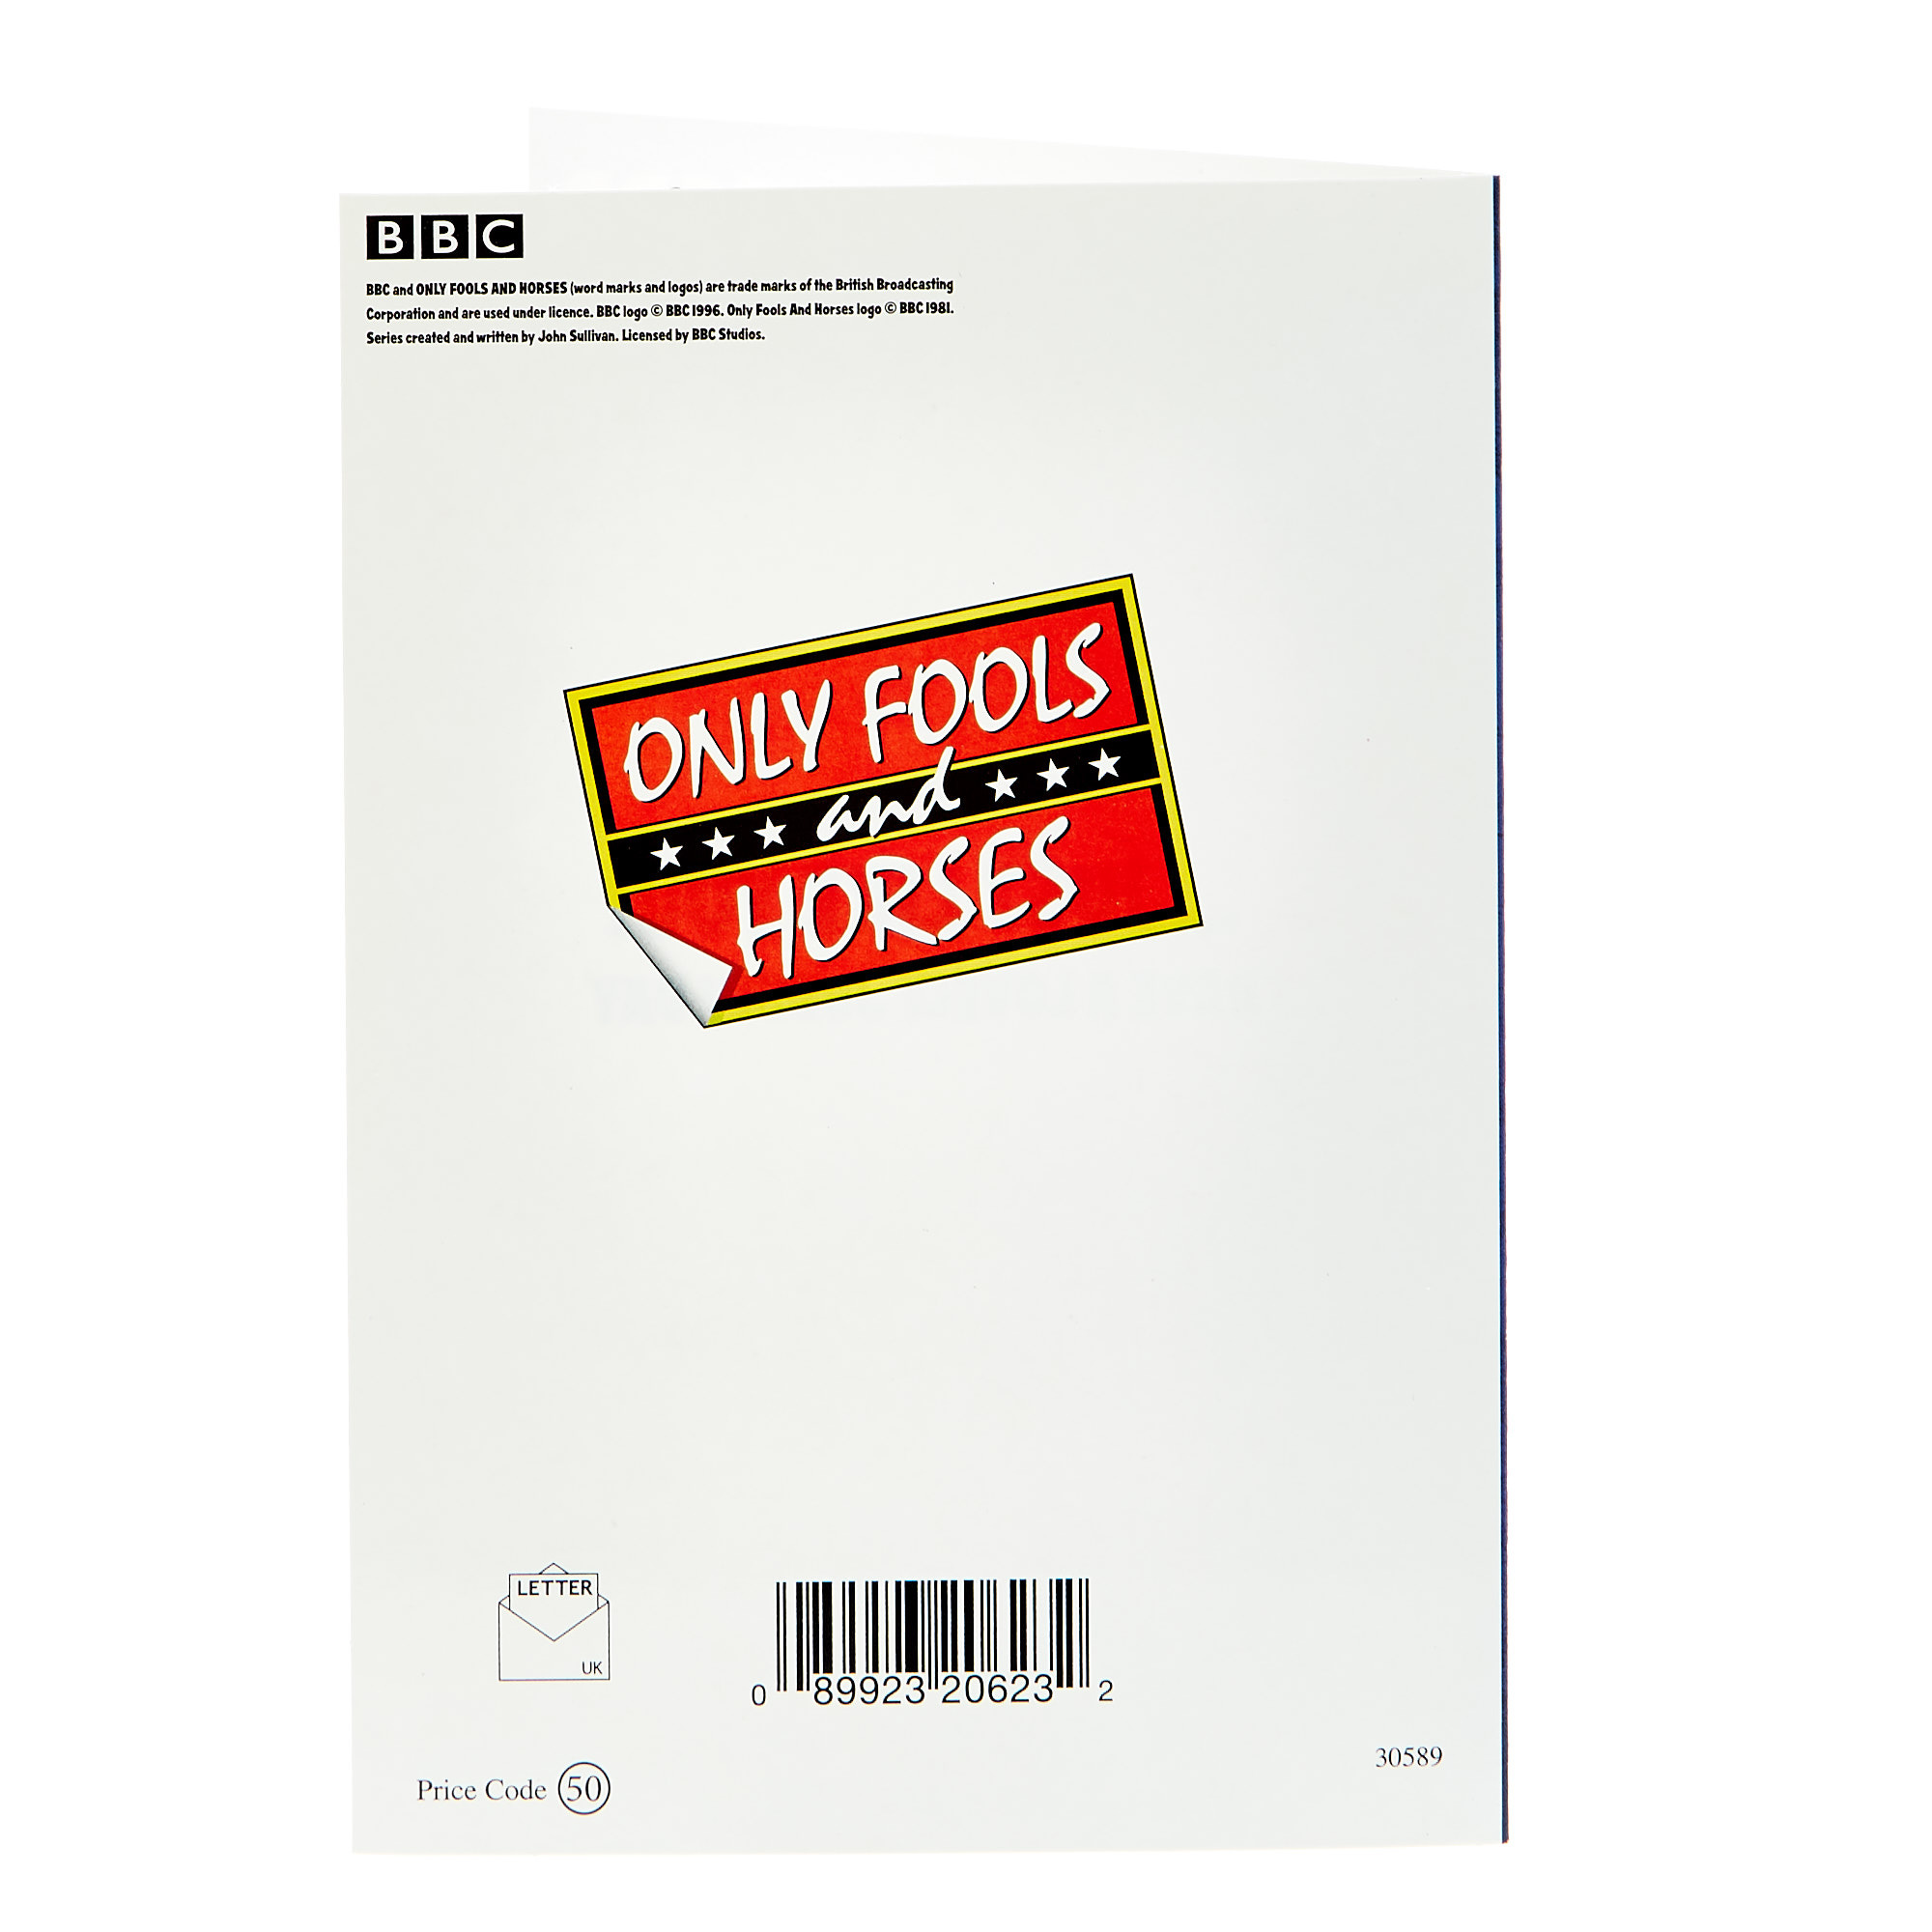 Only Fools & Horses Birthday Card - Priceless Antique